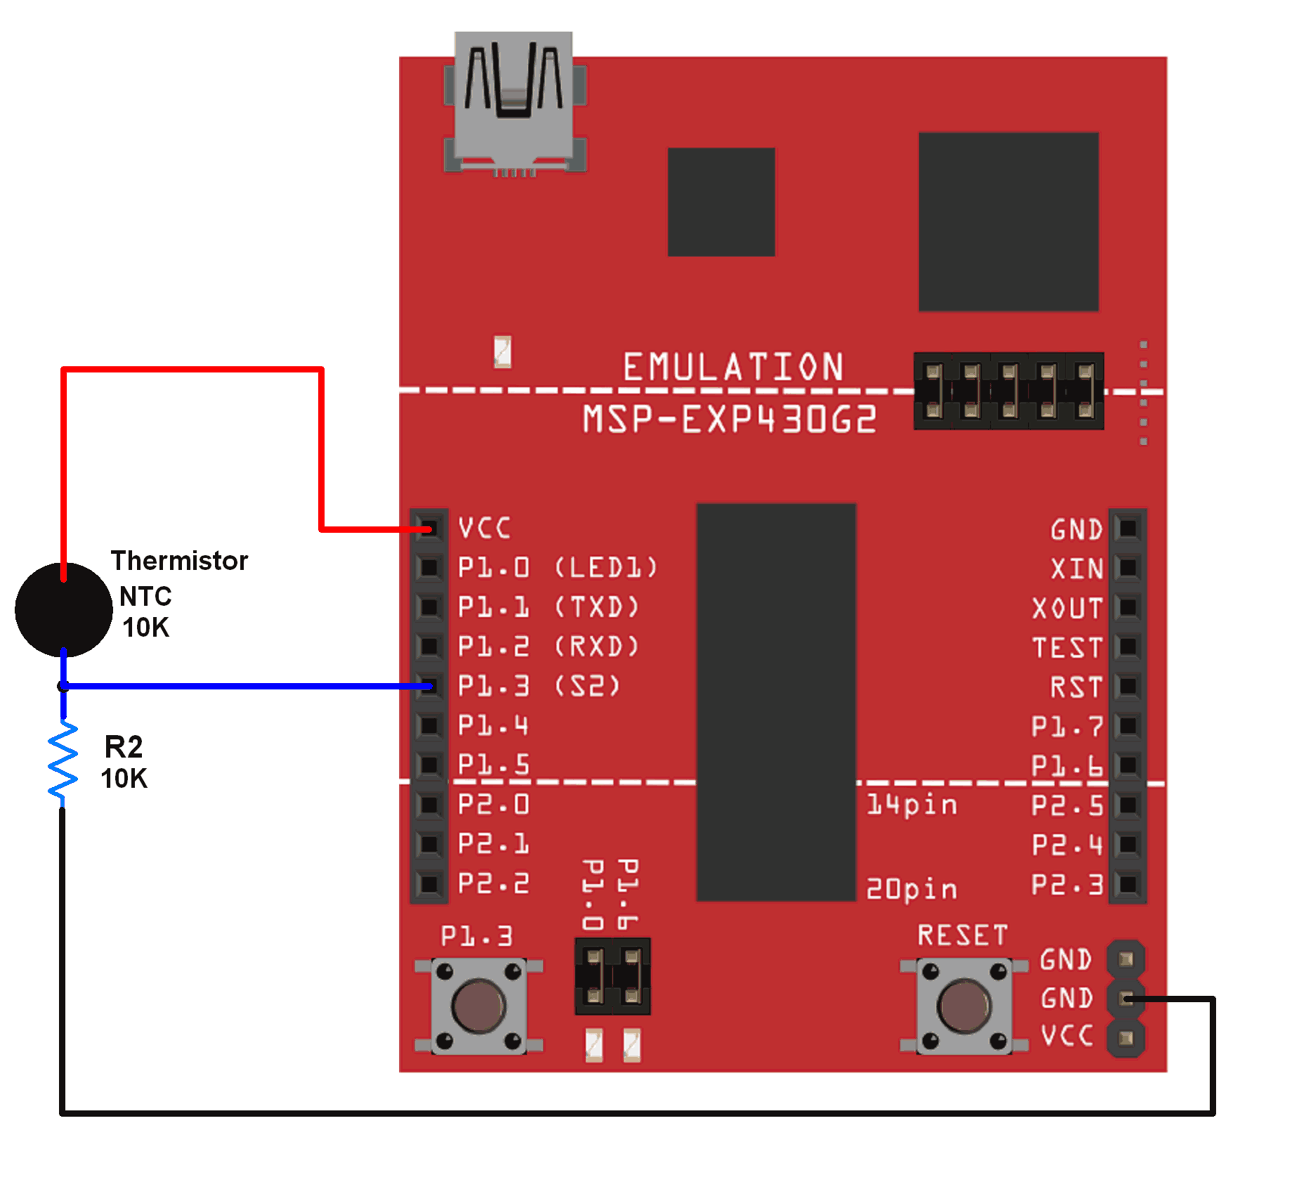 Interfacing Thermistor With MSP-EXP430G2 TI Launchpad